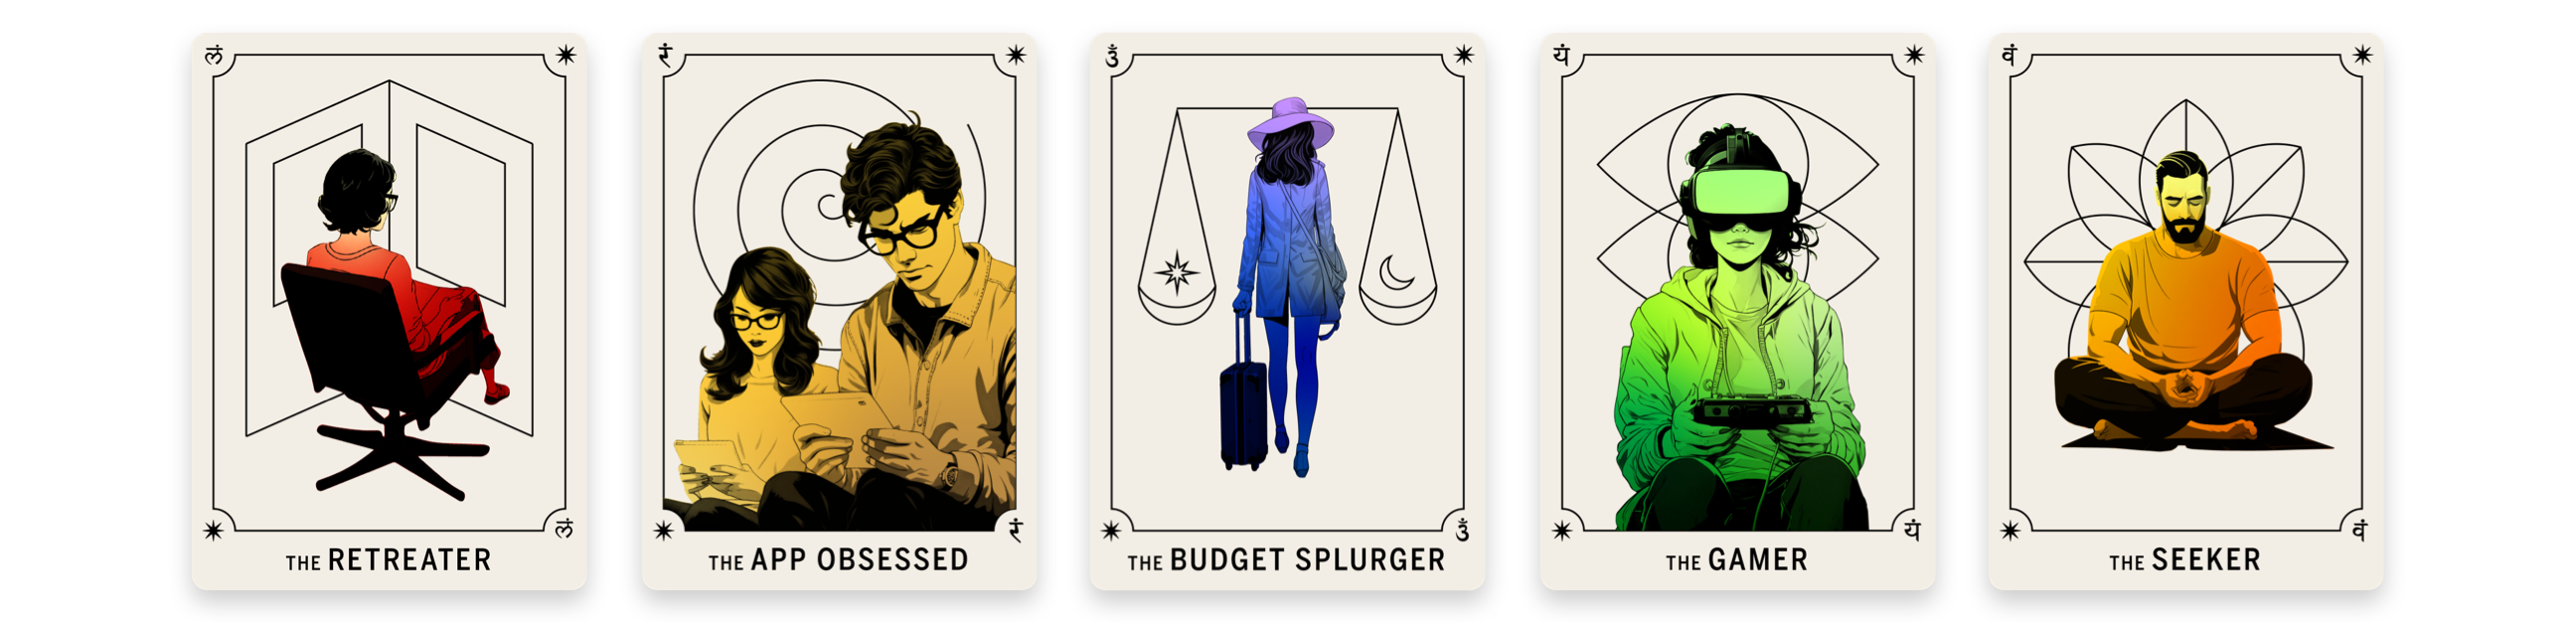 look alike tarot cards: The Retreater, The App Obsessed, The Budget Splurger, The Gamer, The Seeker